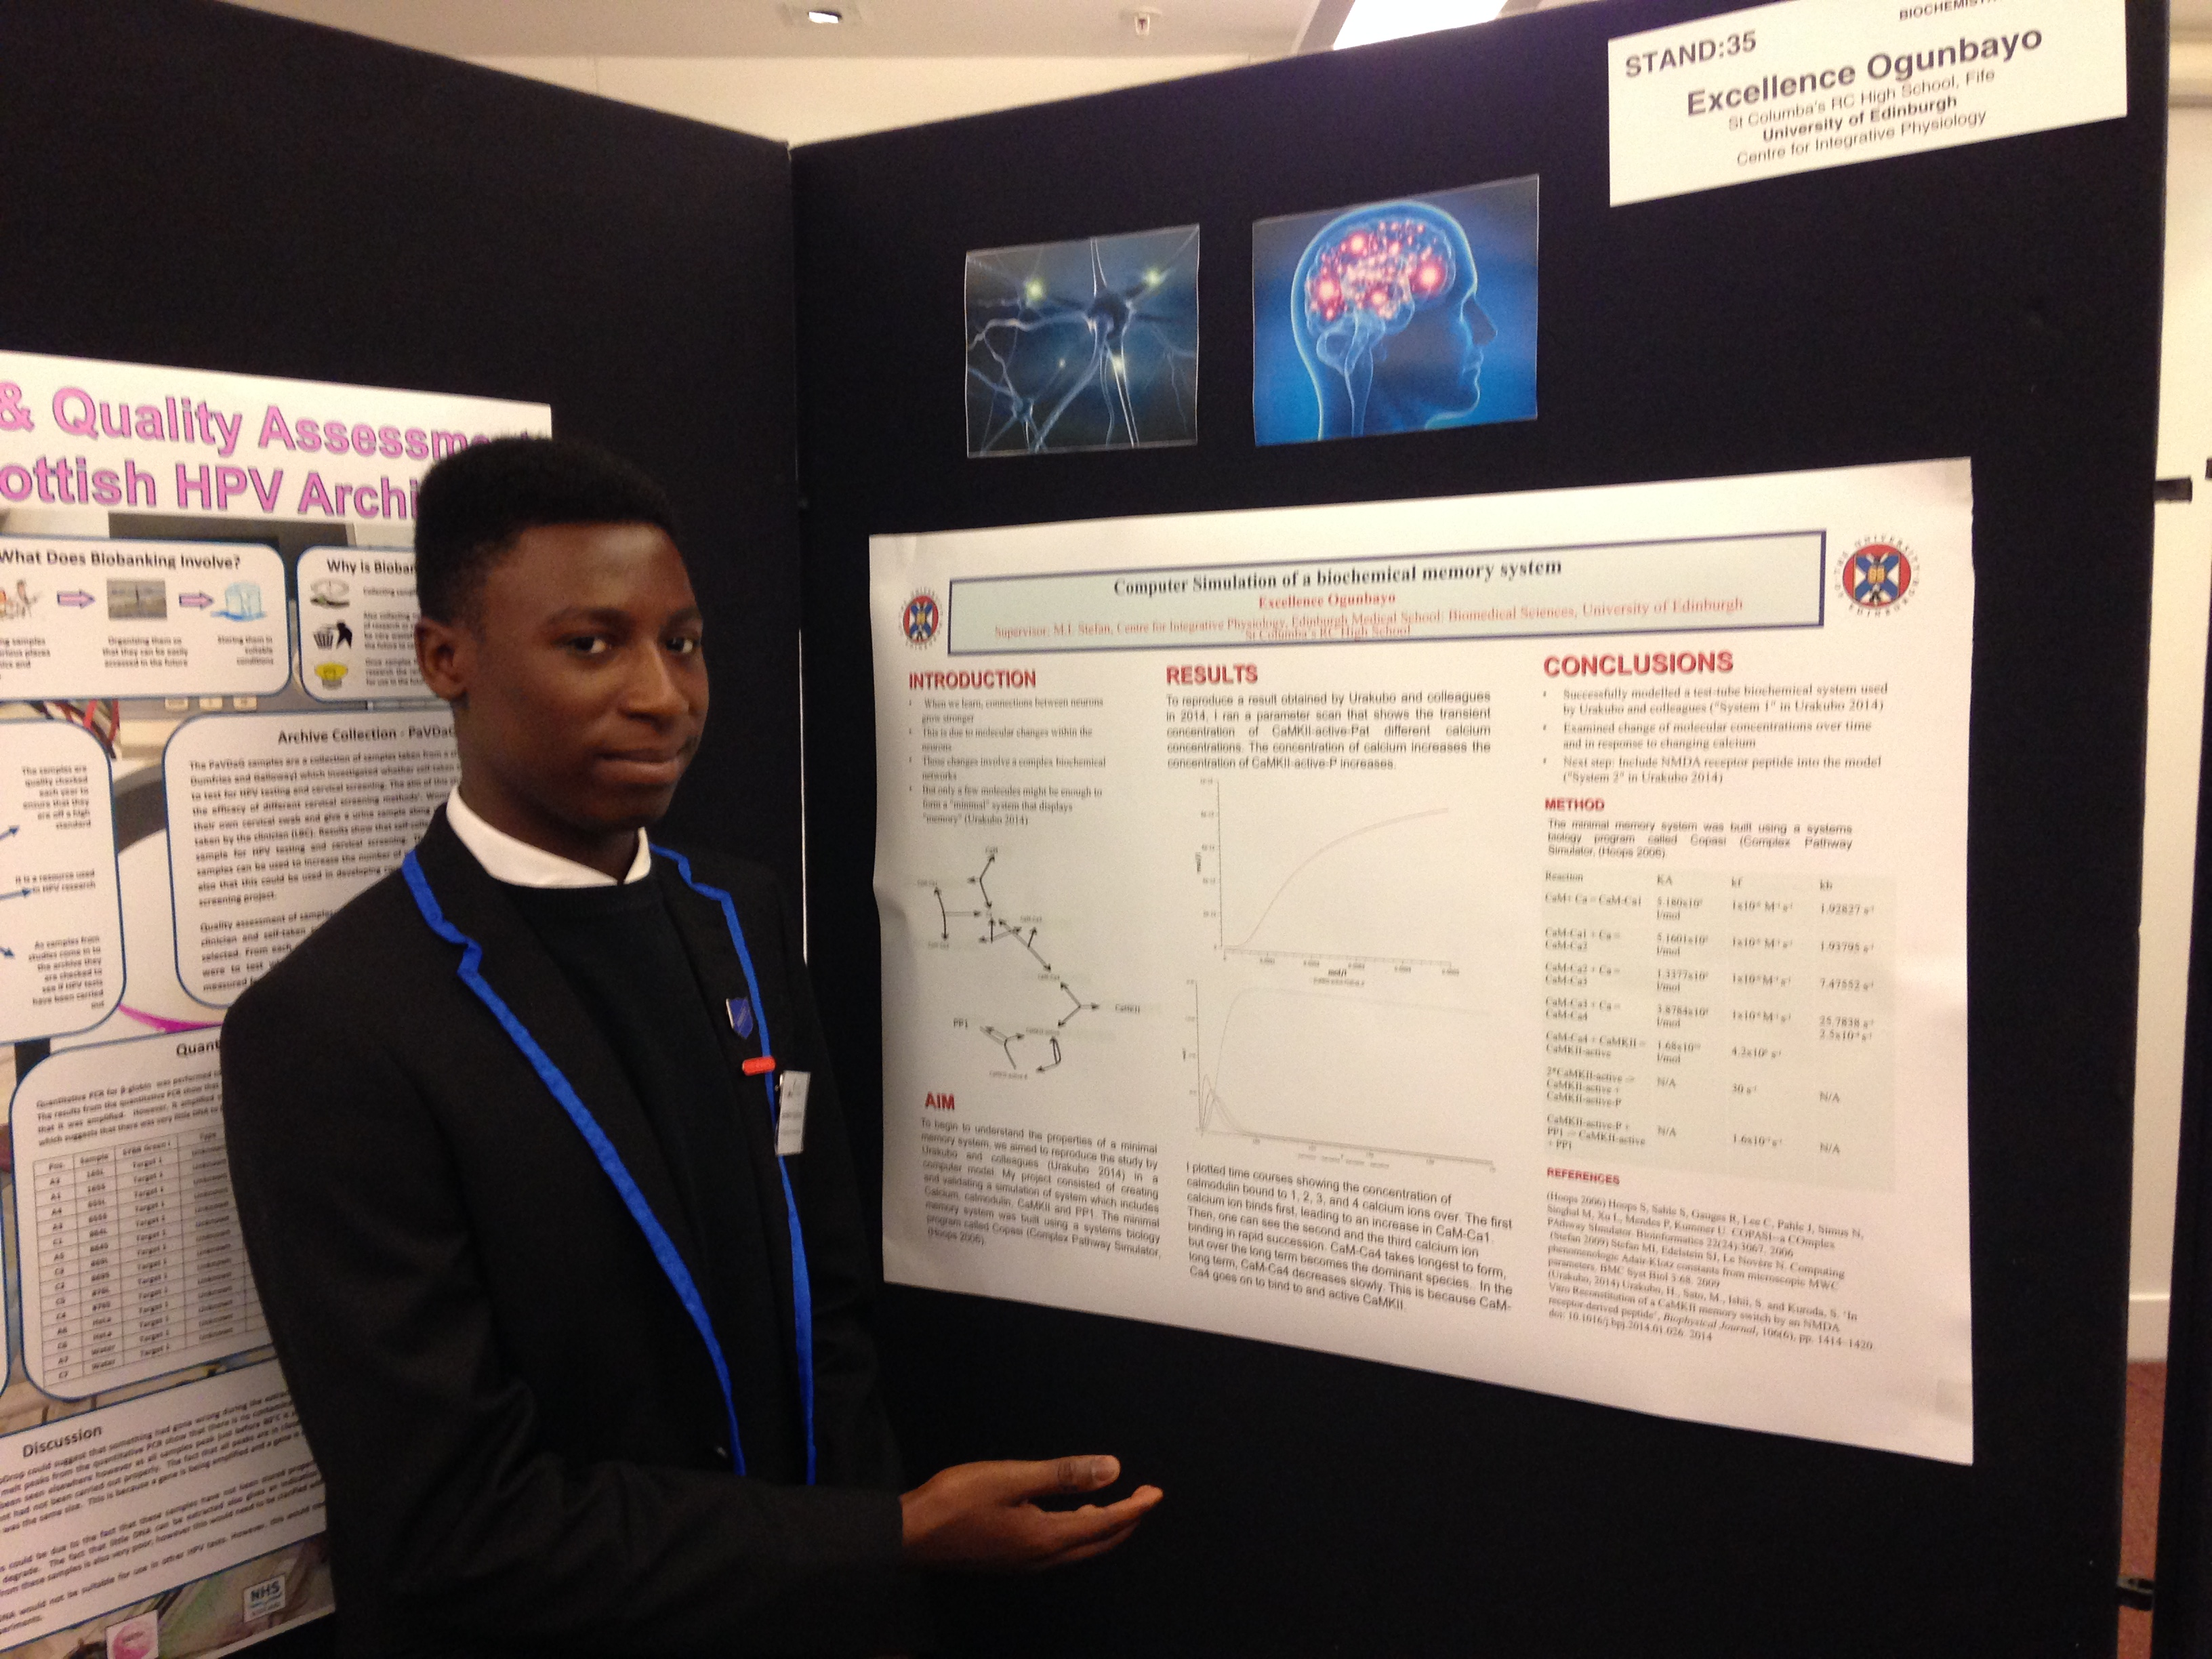 Excellence Ogunbayo presenting his poster